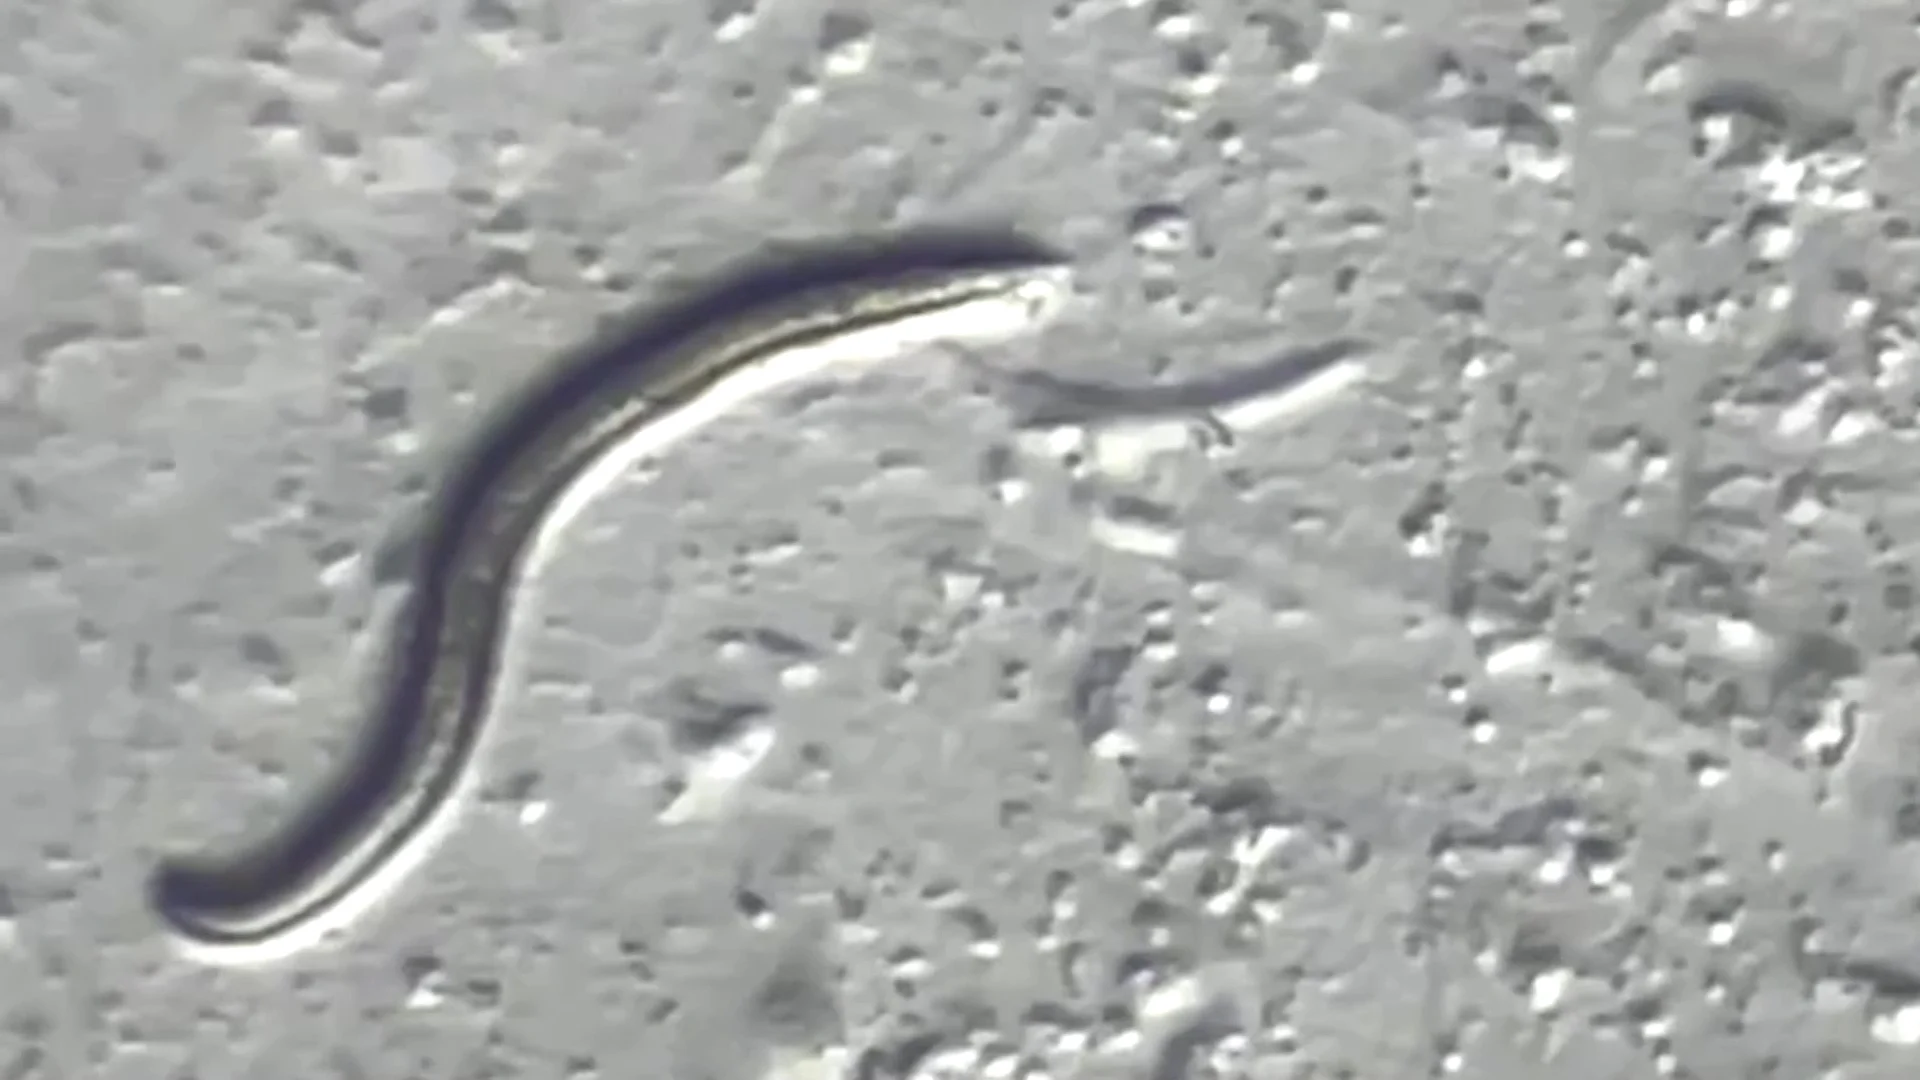 46,000-year-old worms come back to life after thawing